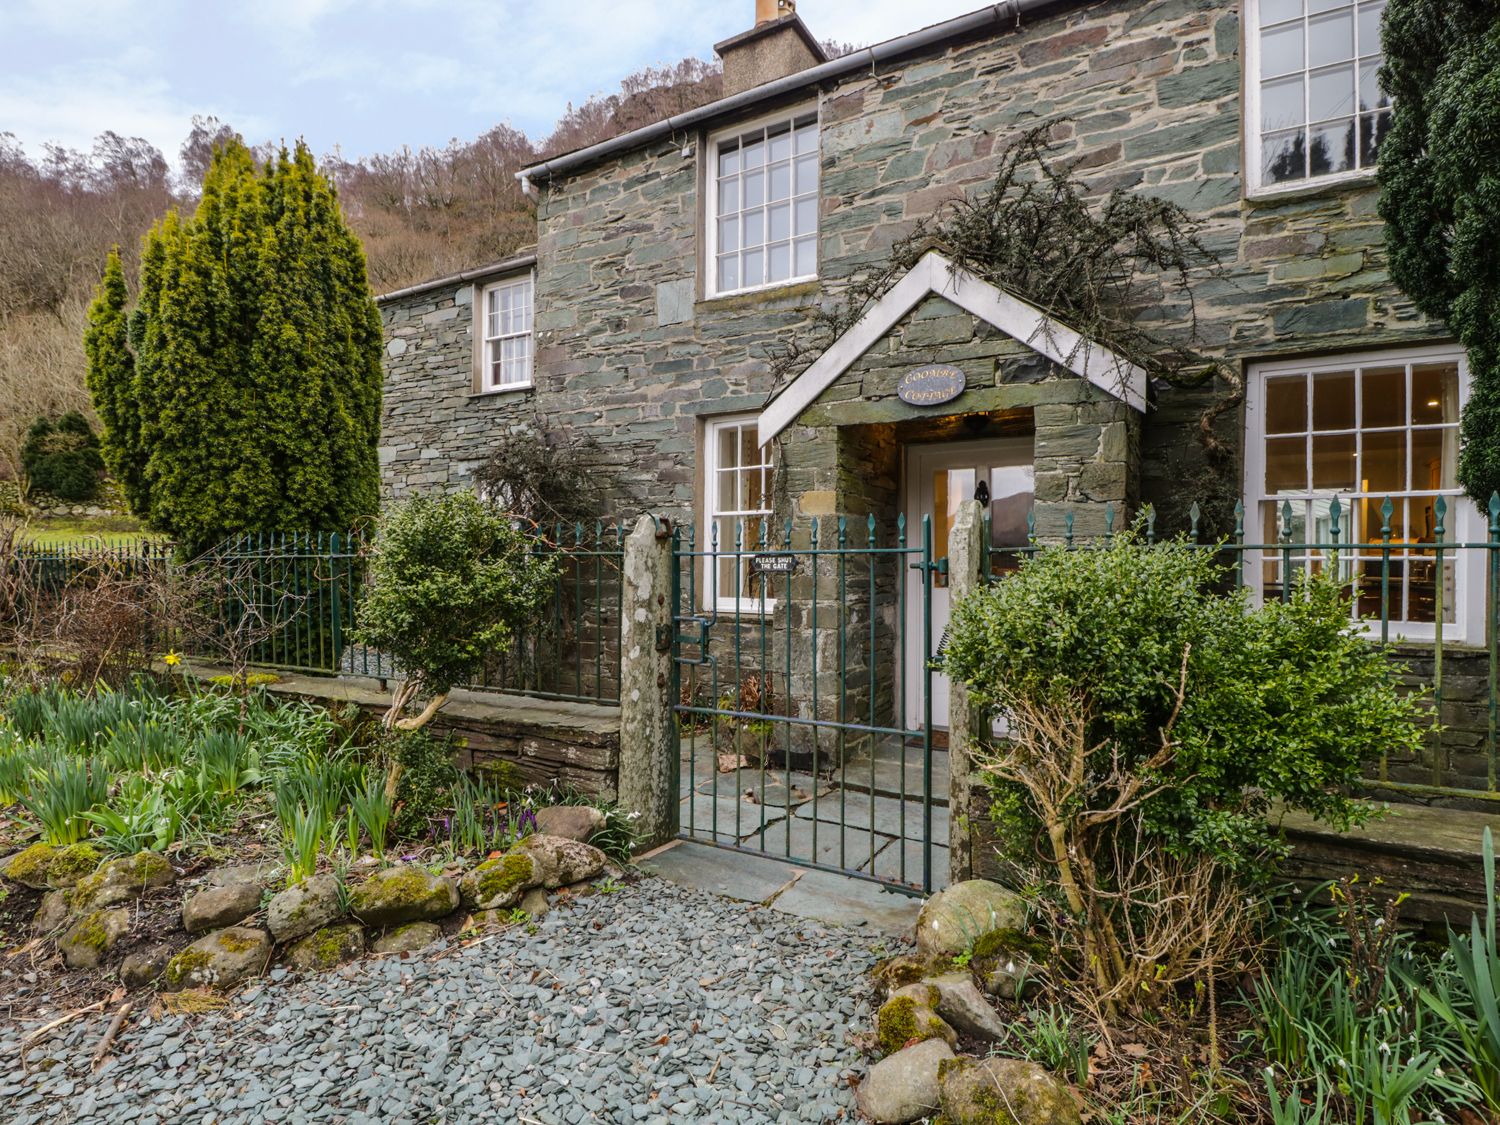 Coombe Cottage - Lake District - 972286 - photo 1